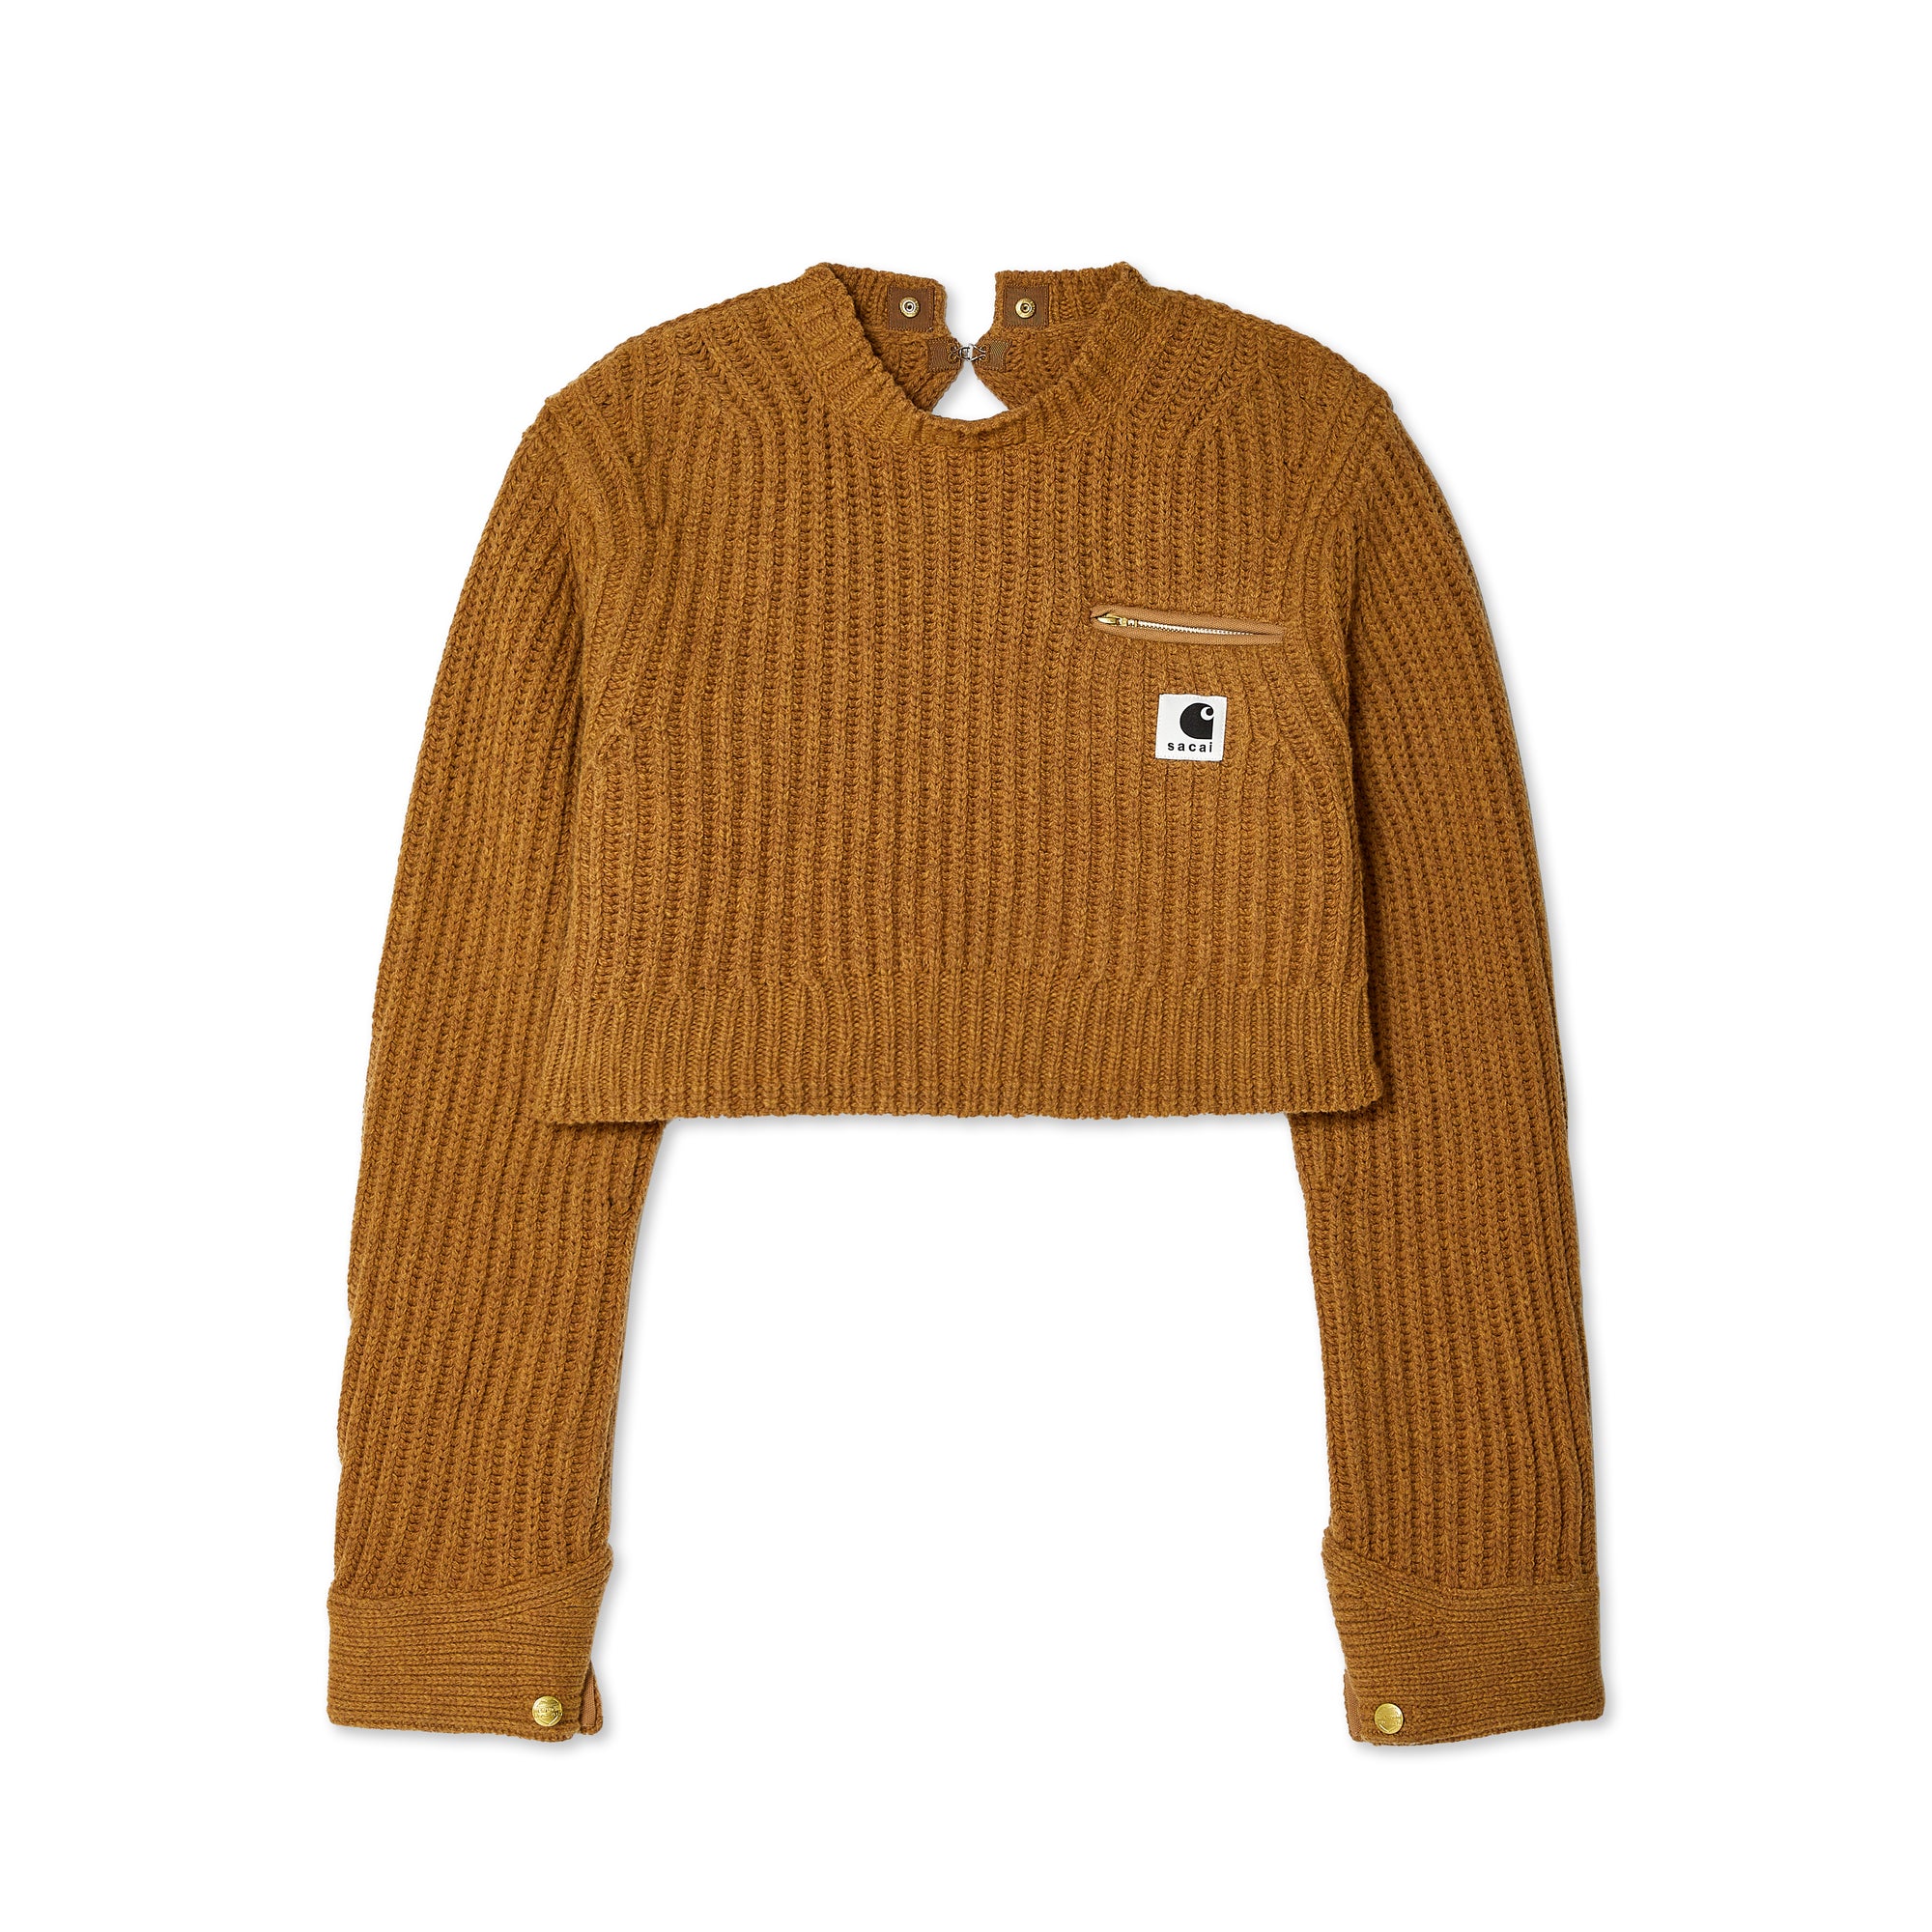 sacai - Carhartt WIP Women’s Detroit Cropped Knit Pullover - (Beige) view 2